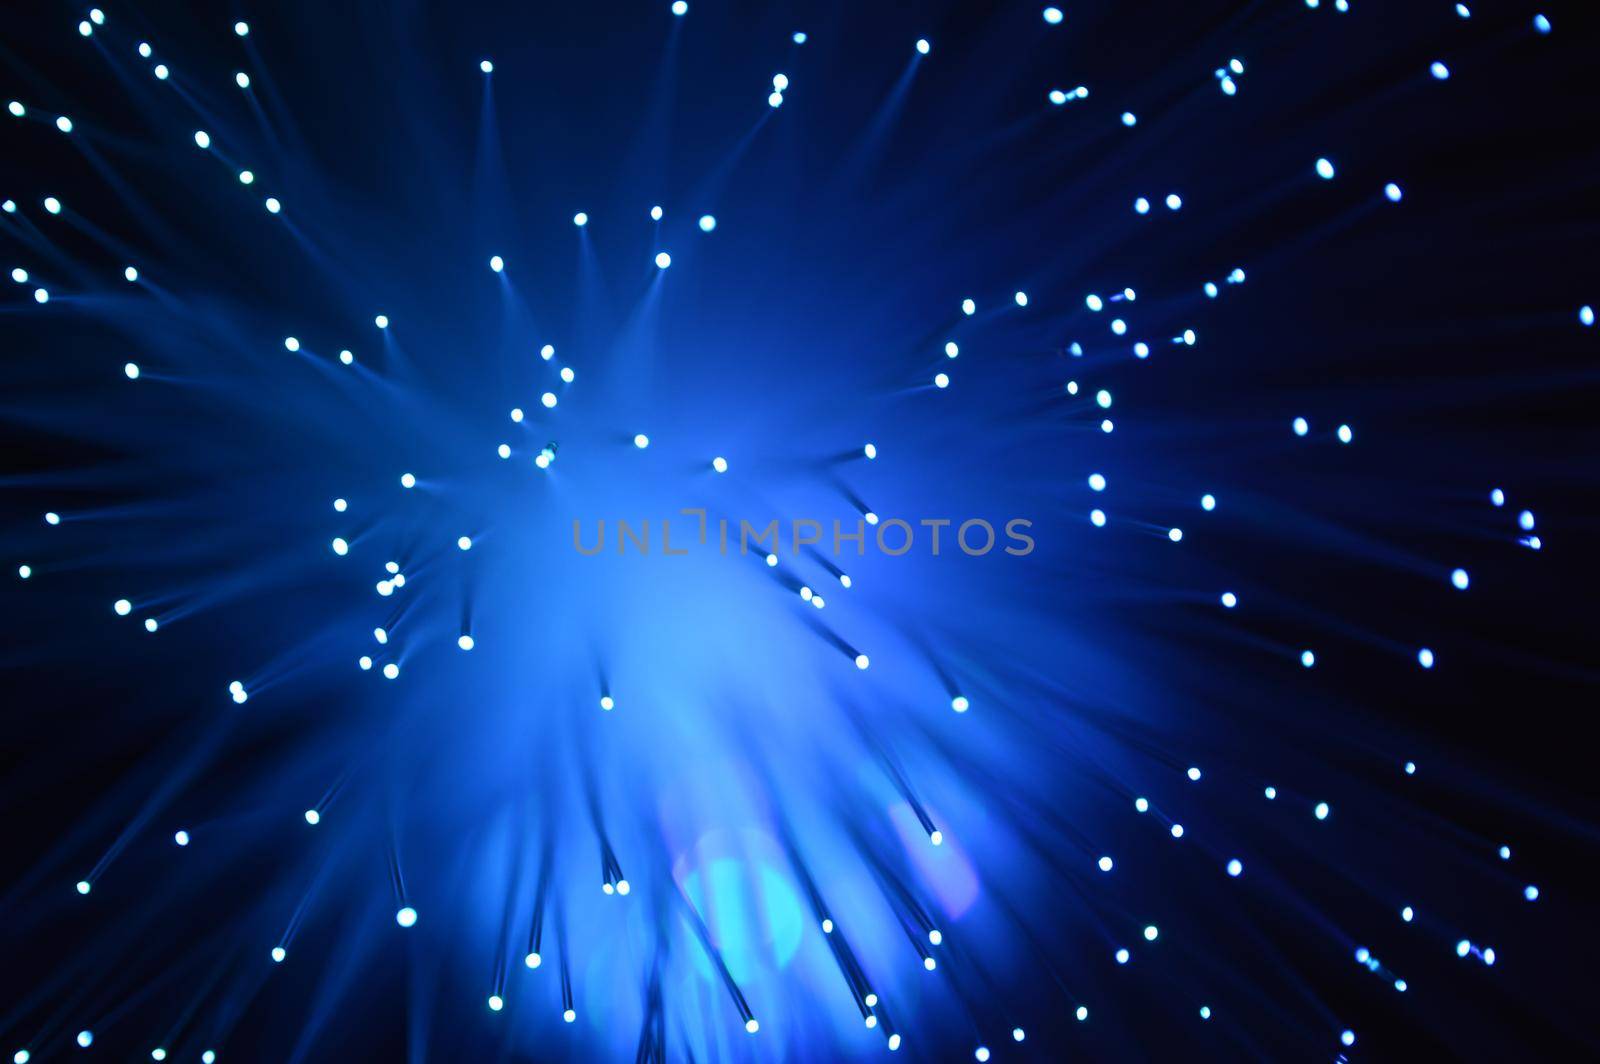 A blue abstract background from a series of color changing images of the same scene of fiber optic cables.